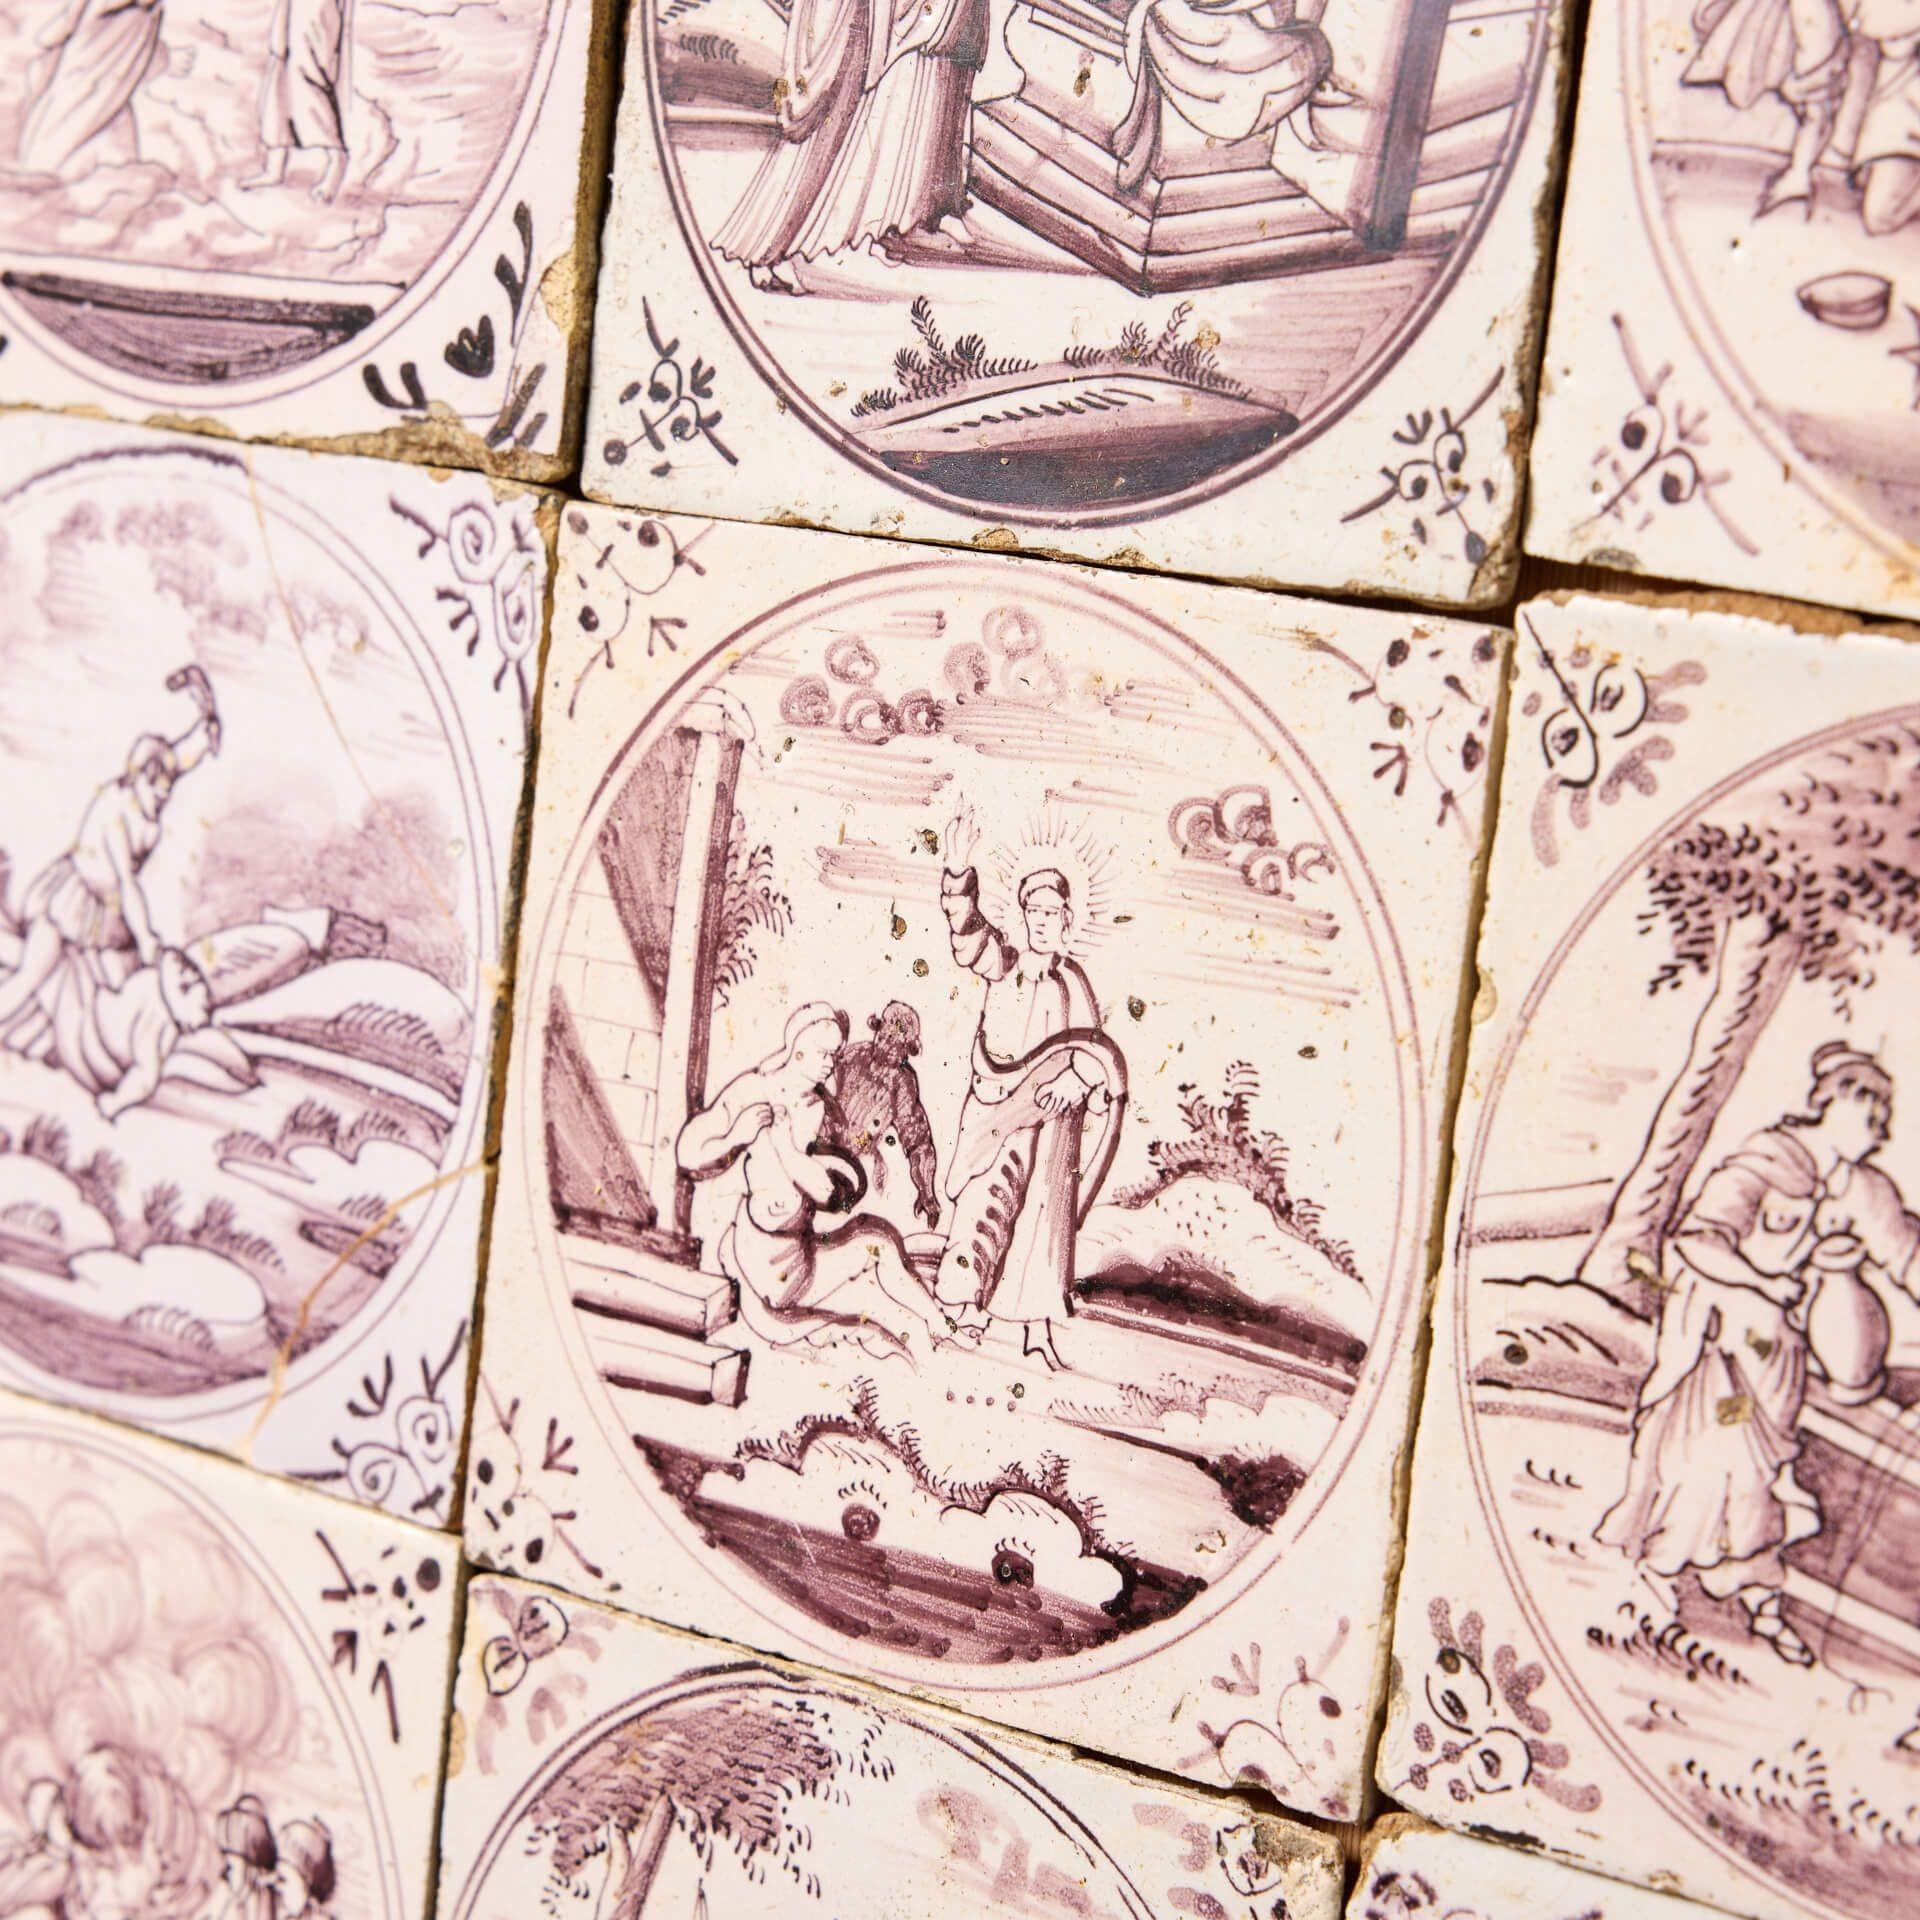 Set of 16 Antique Delft Tiles Depicting Biblical Scenes In Fair Condition For Sale In Wormelow, Herefordshire